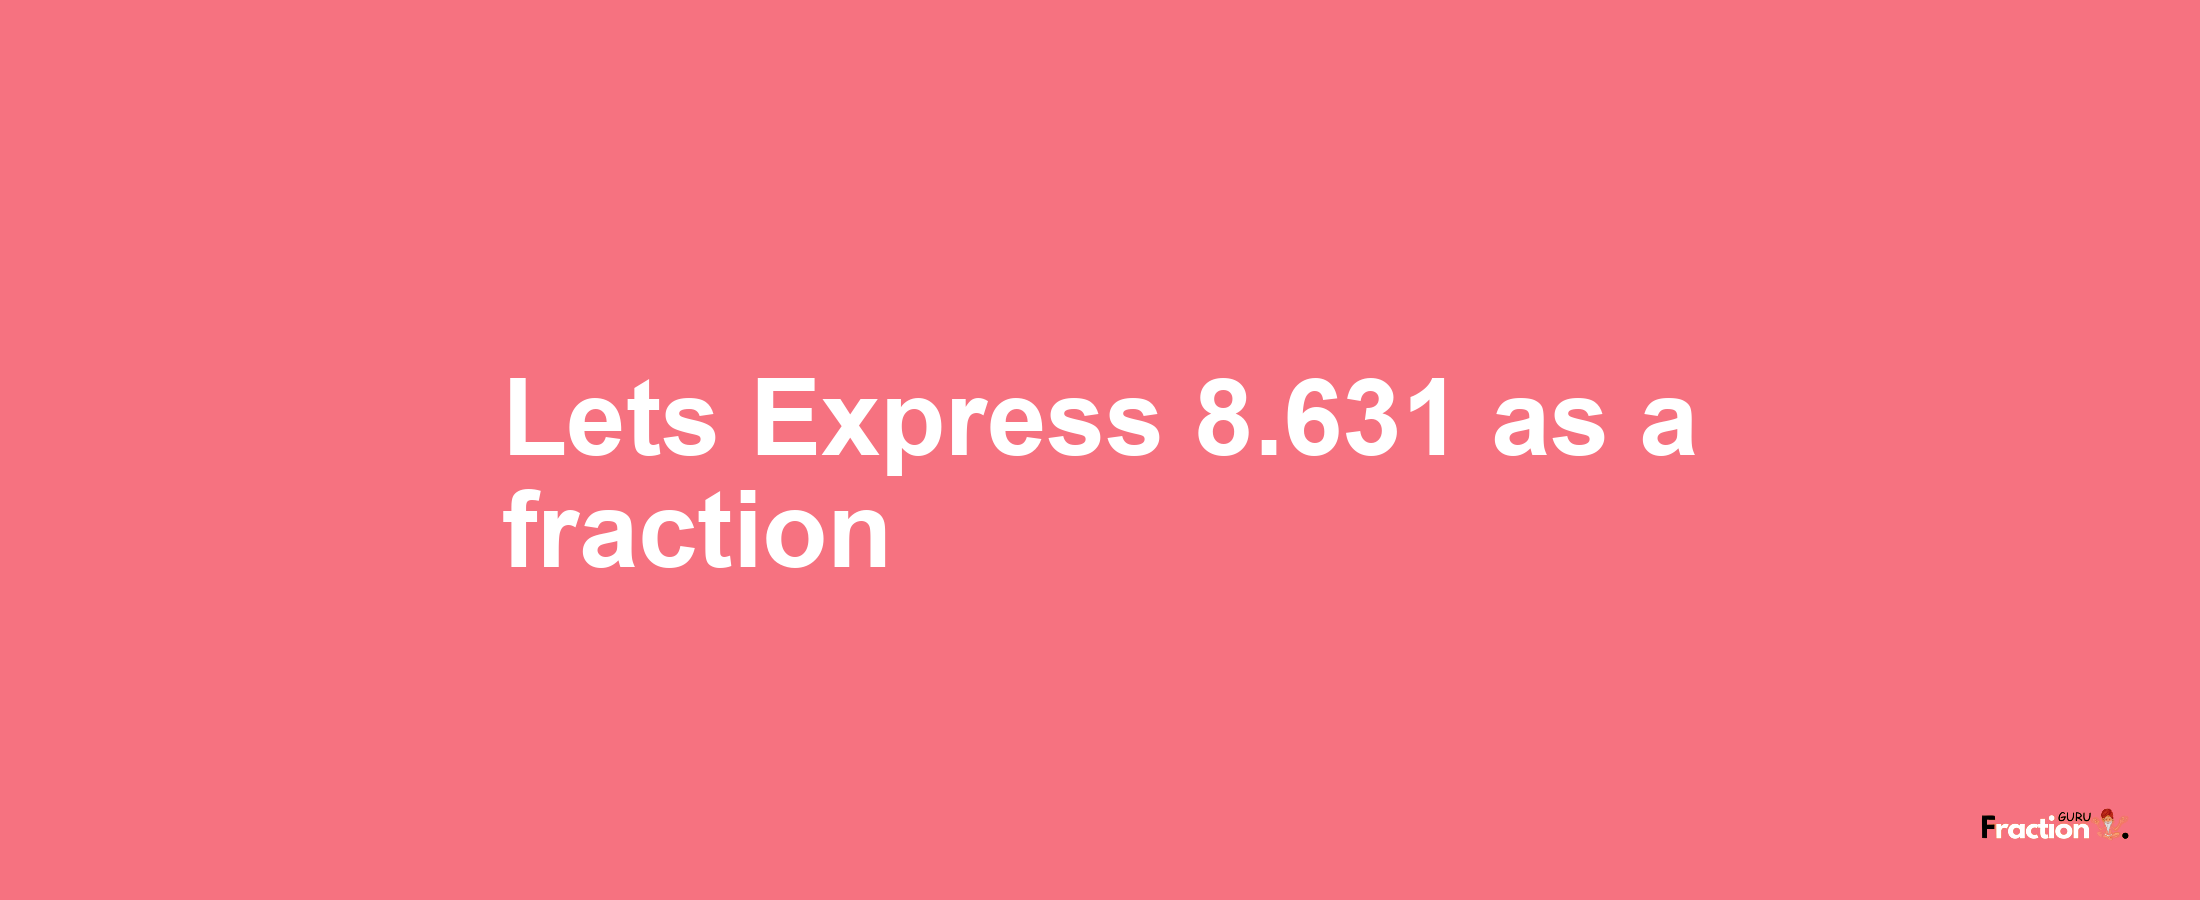 Lets Express 8.631 as afraction